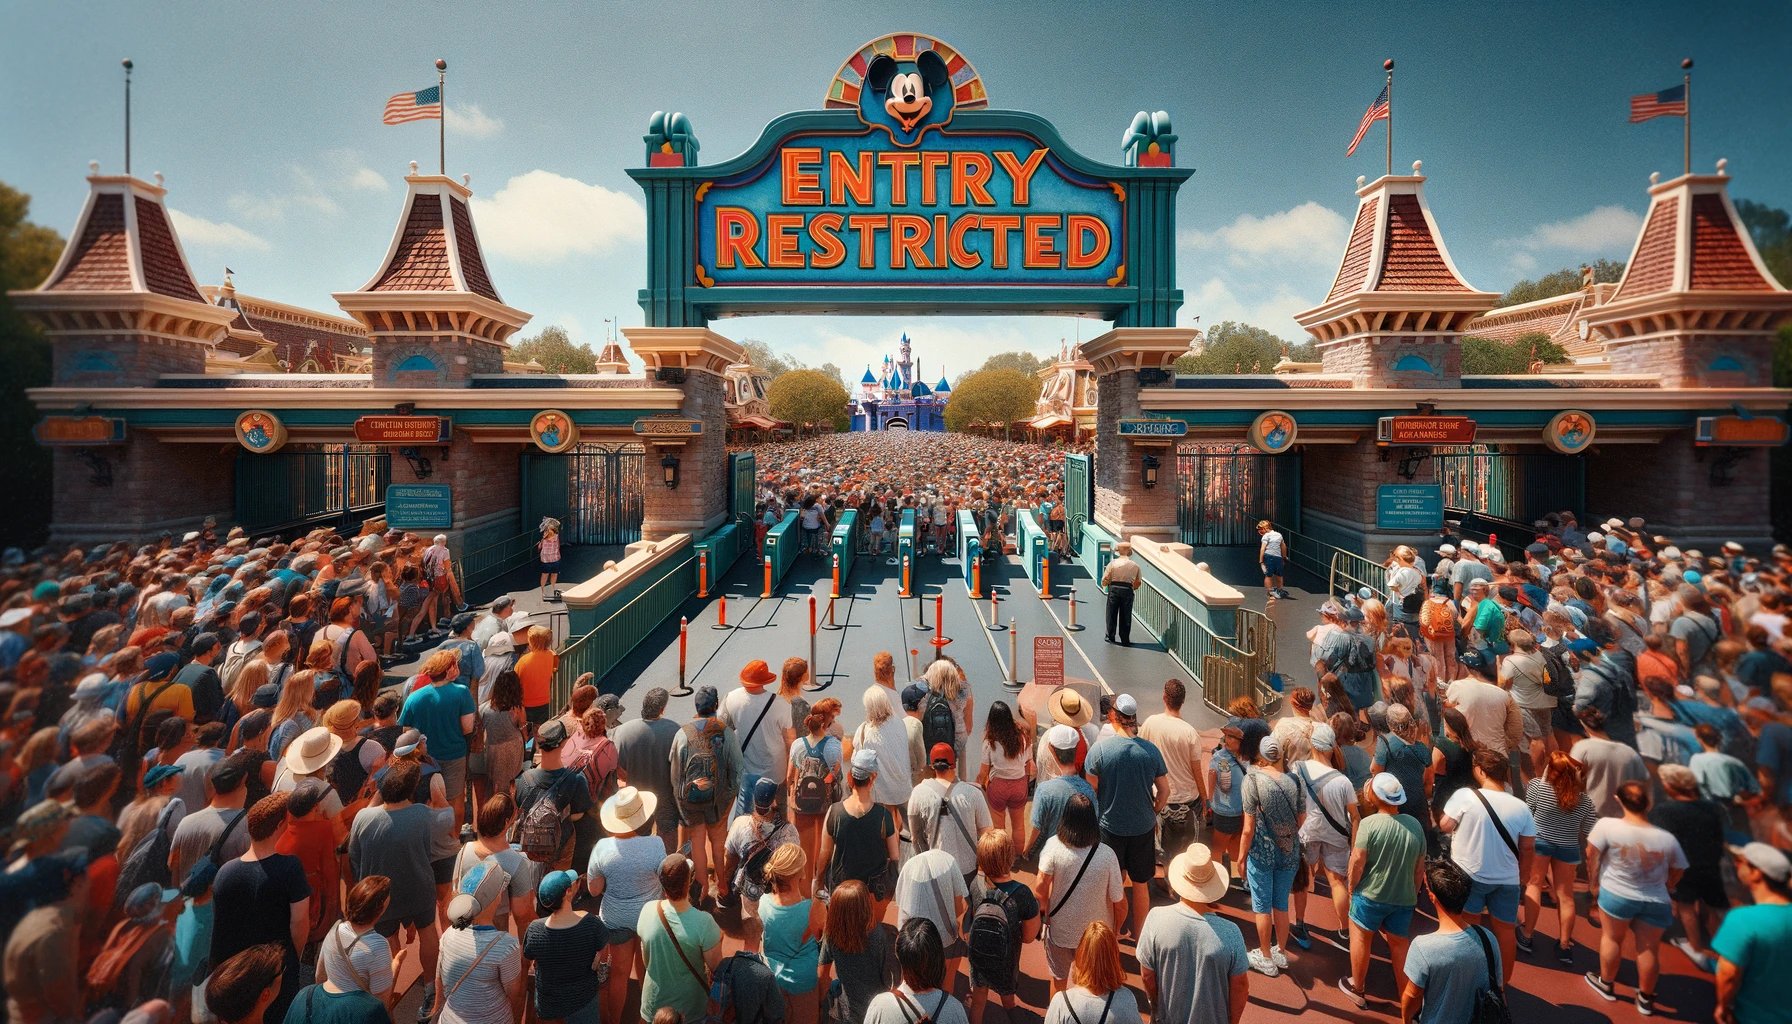 An evocative scene at a Disney theme park depicting entrance limitations. The image shows a long line of visitors, diverse in age and ethnicity, waiting under a large, colorful 'Entry Restricted' sign. The park gates are partially closed, with park employees managing the crowd. In the background, some attractions are visible but less crowded than usual. The atmosphere is one of orderly waiting and mild frustration, under a clear blue sky, highlighting the impact of the entrance restrictions.